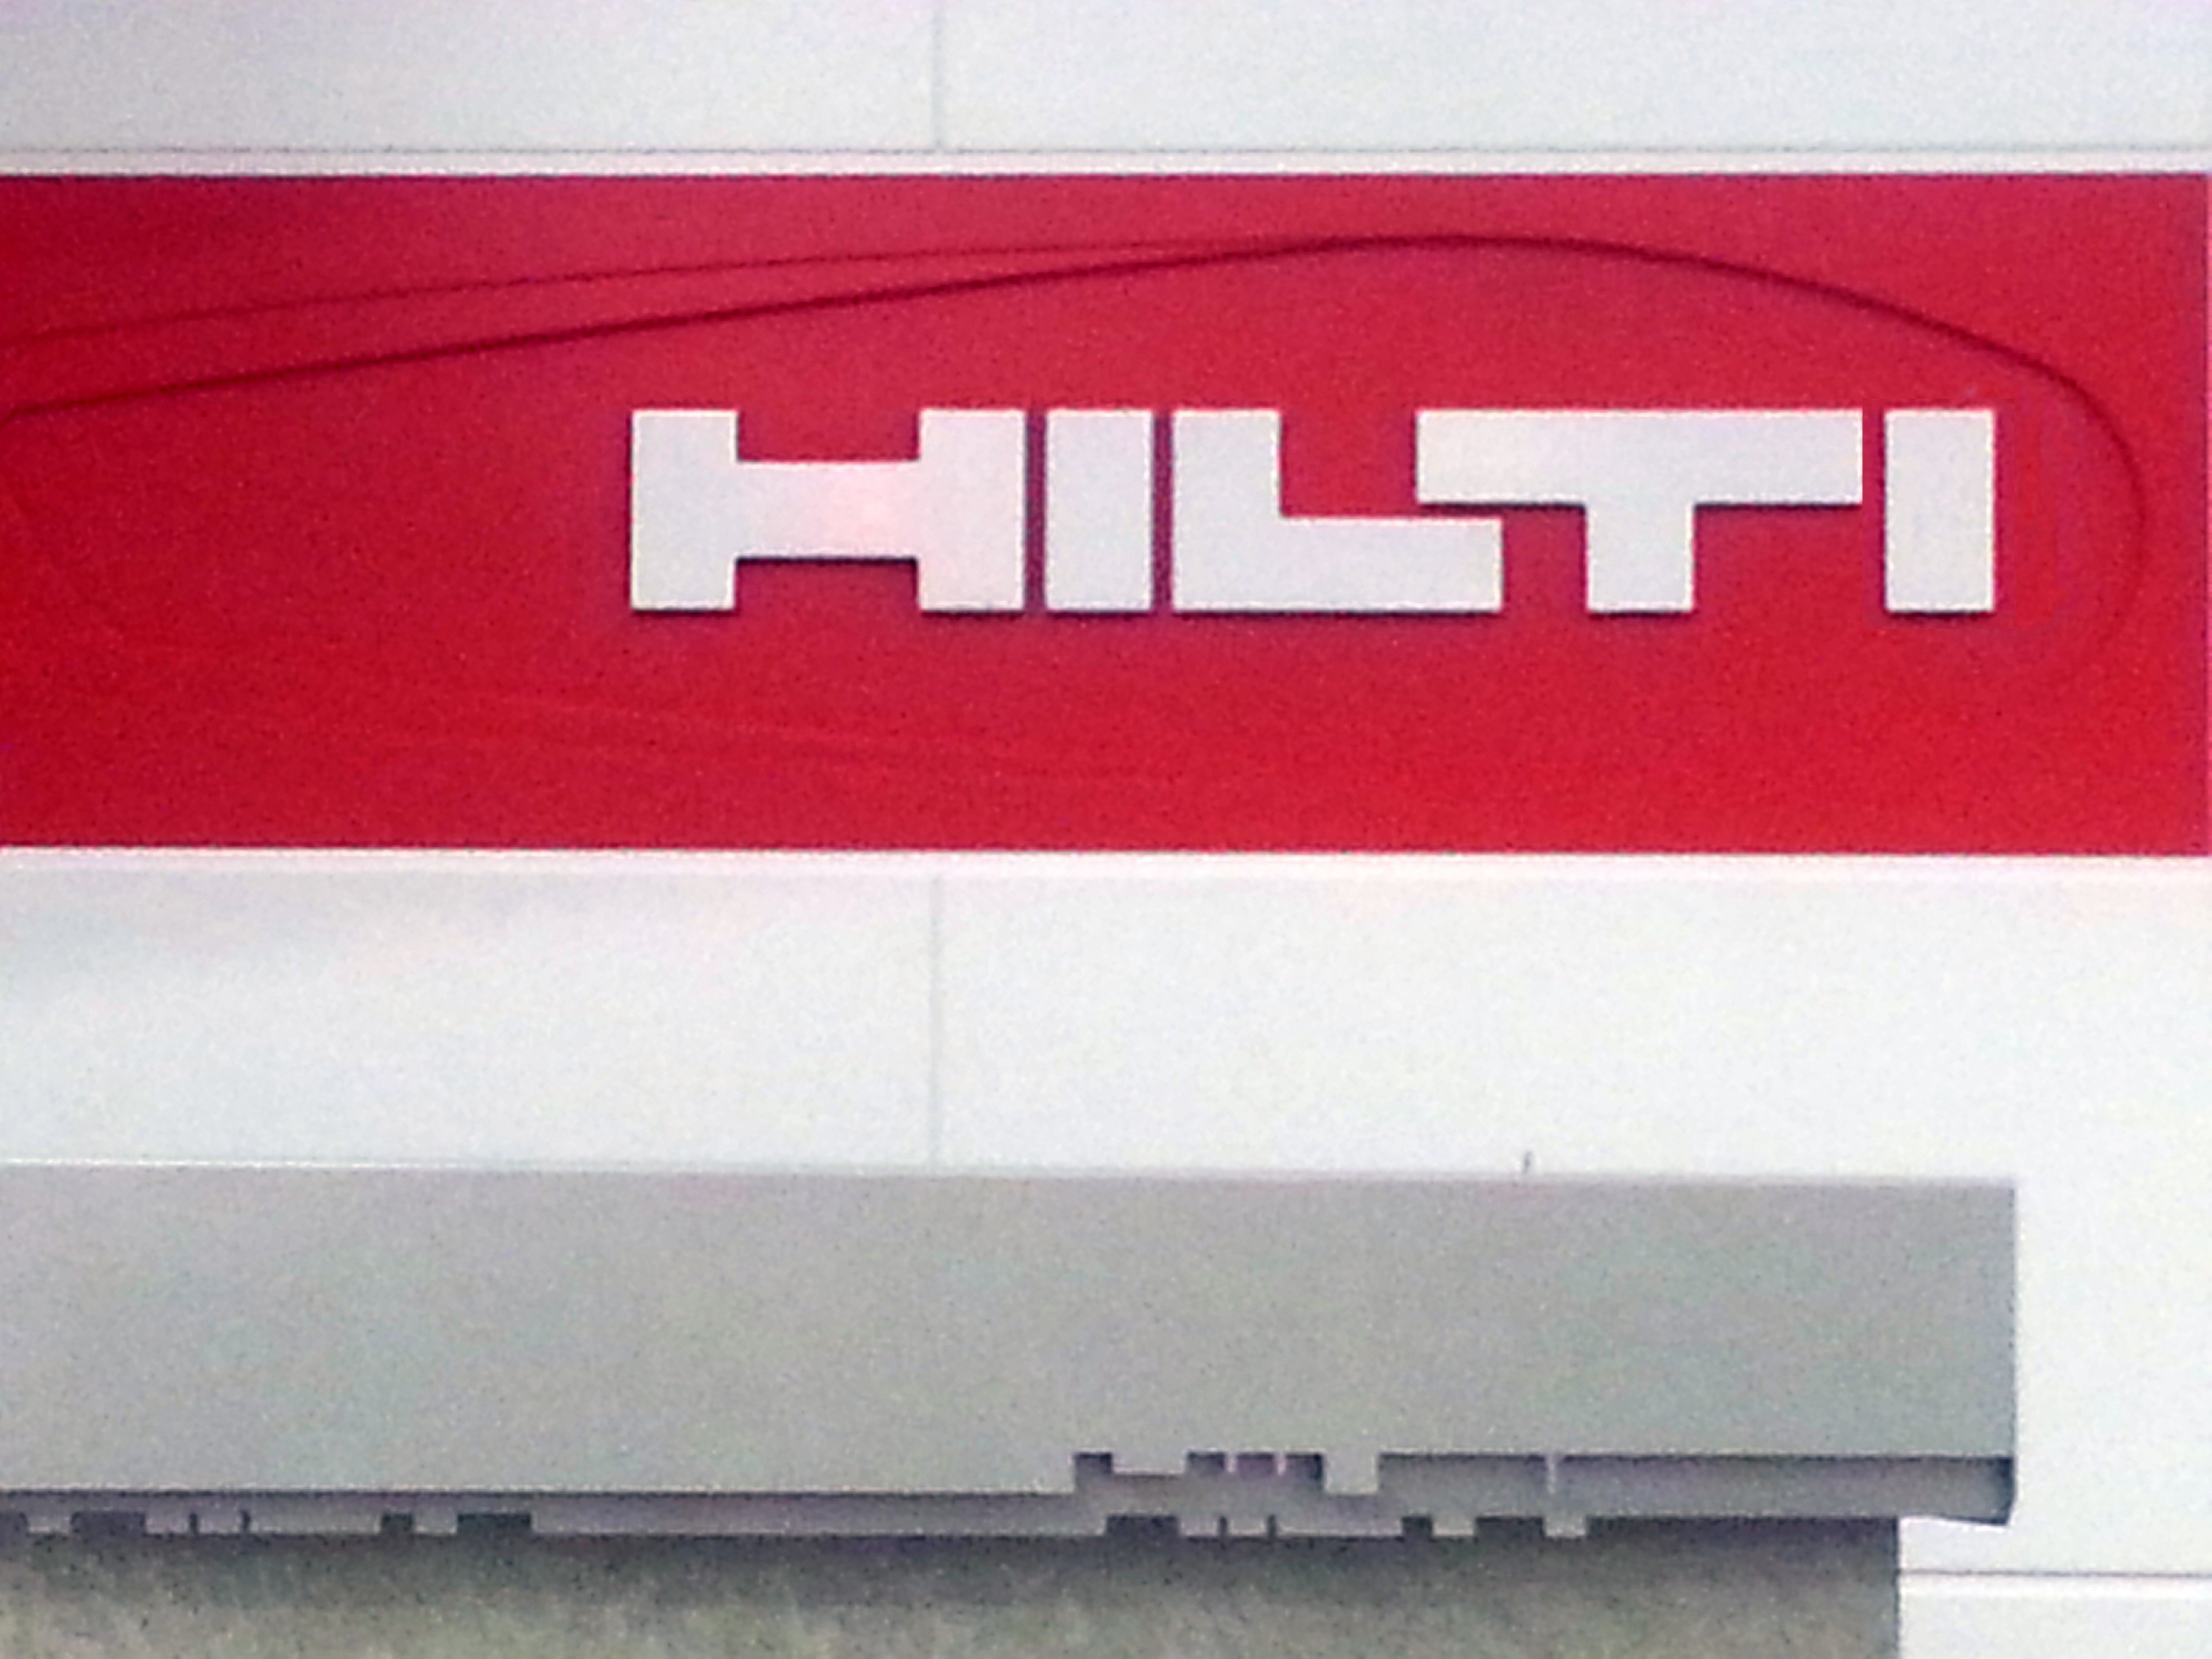 LeaveRussia: HILTI is Reducing its Business Operations in Russia